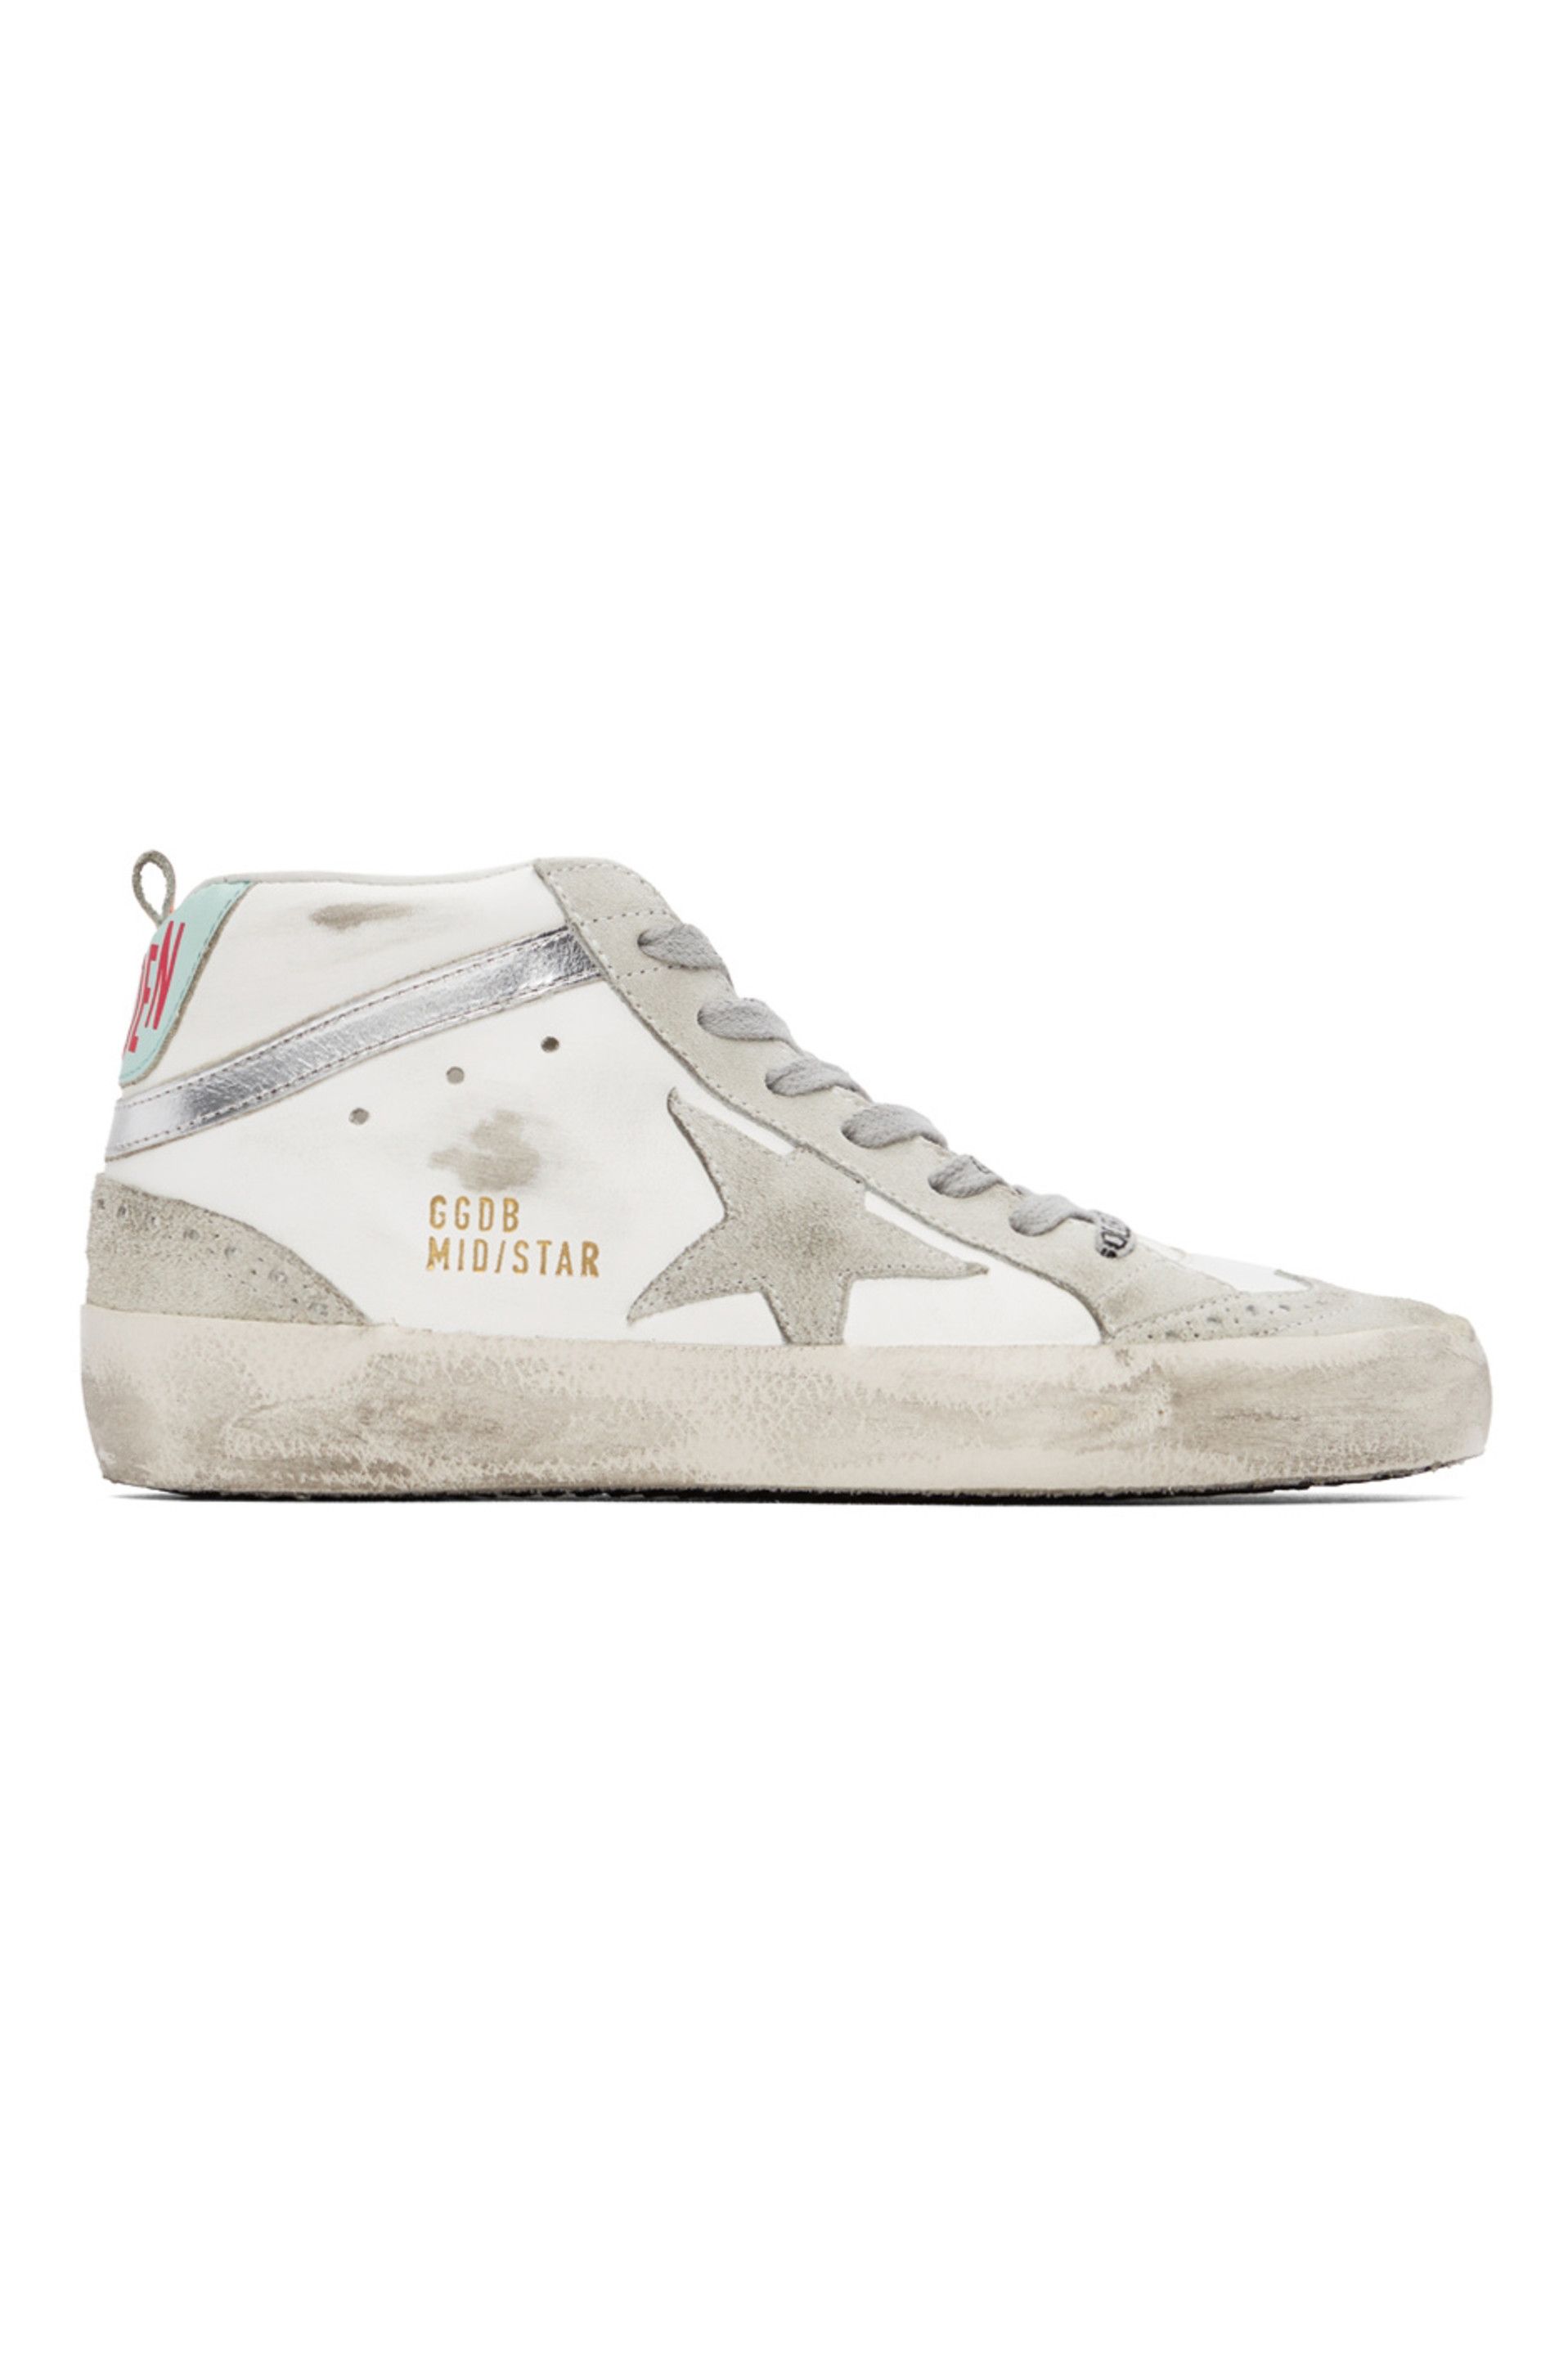 Golden Goose - White & Grey Mid Star Classic Sneakers | SSENSE